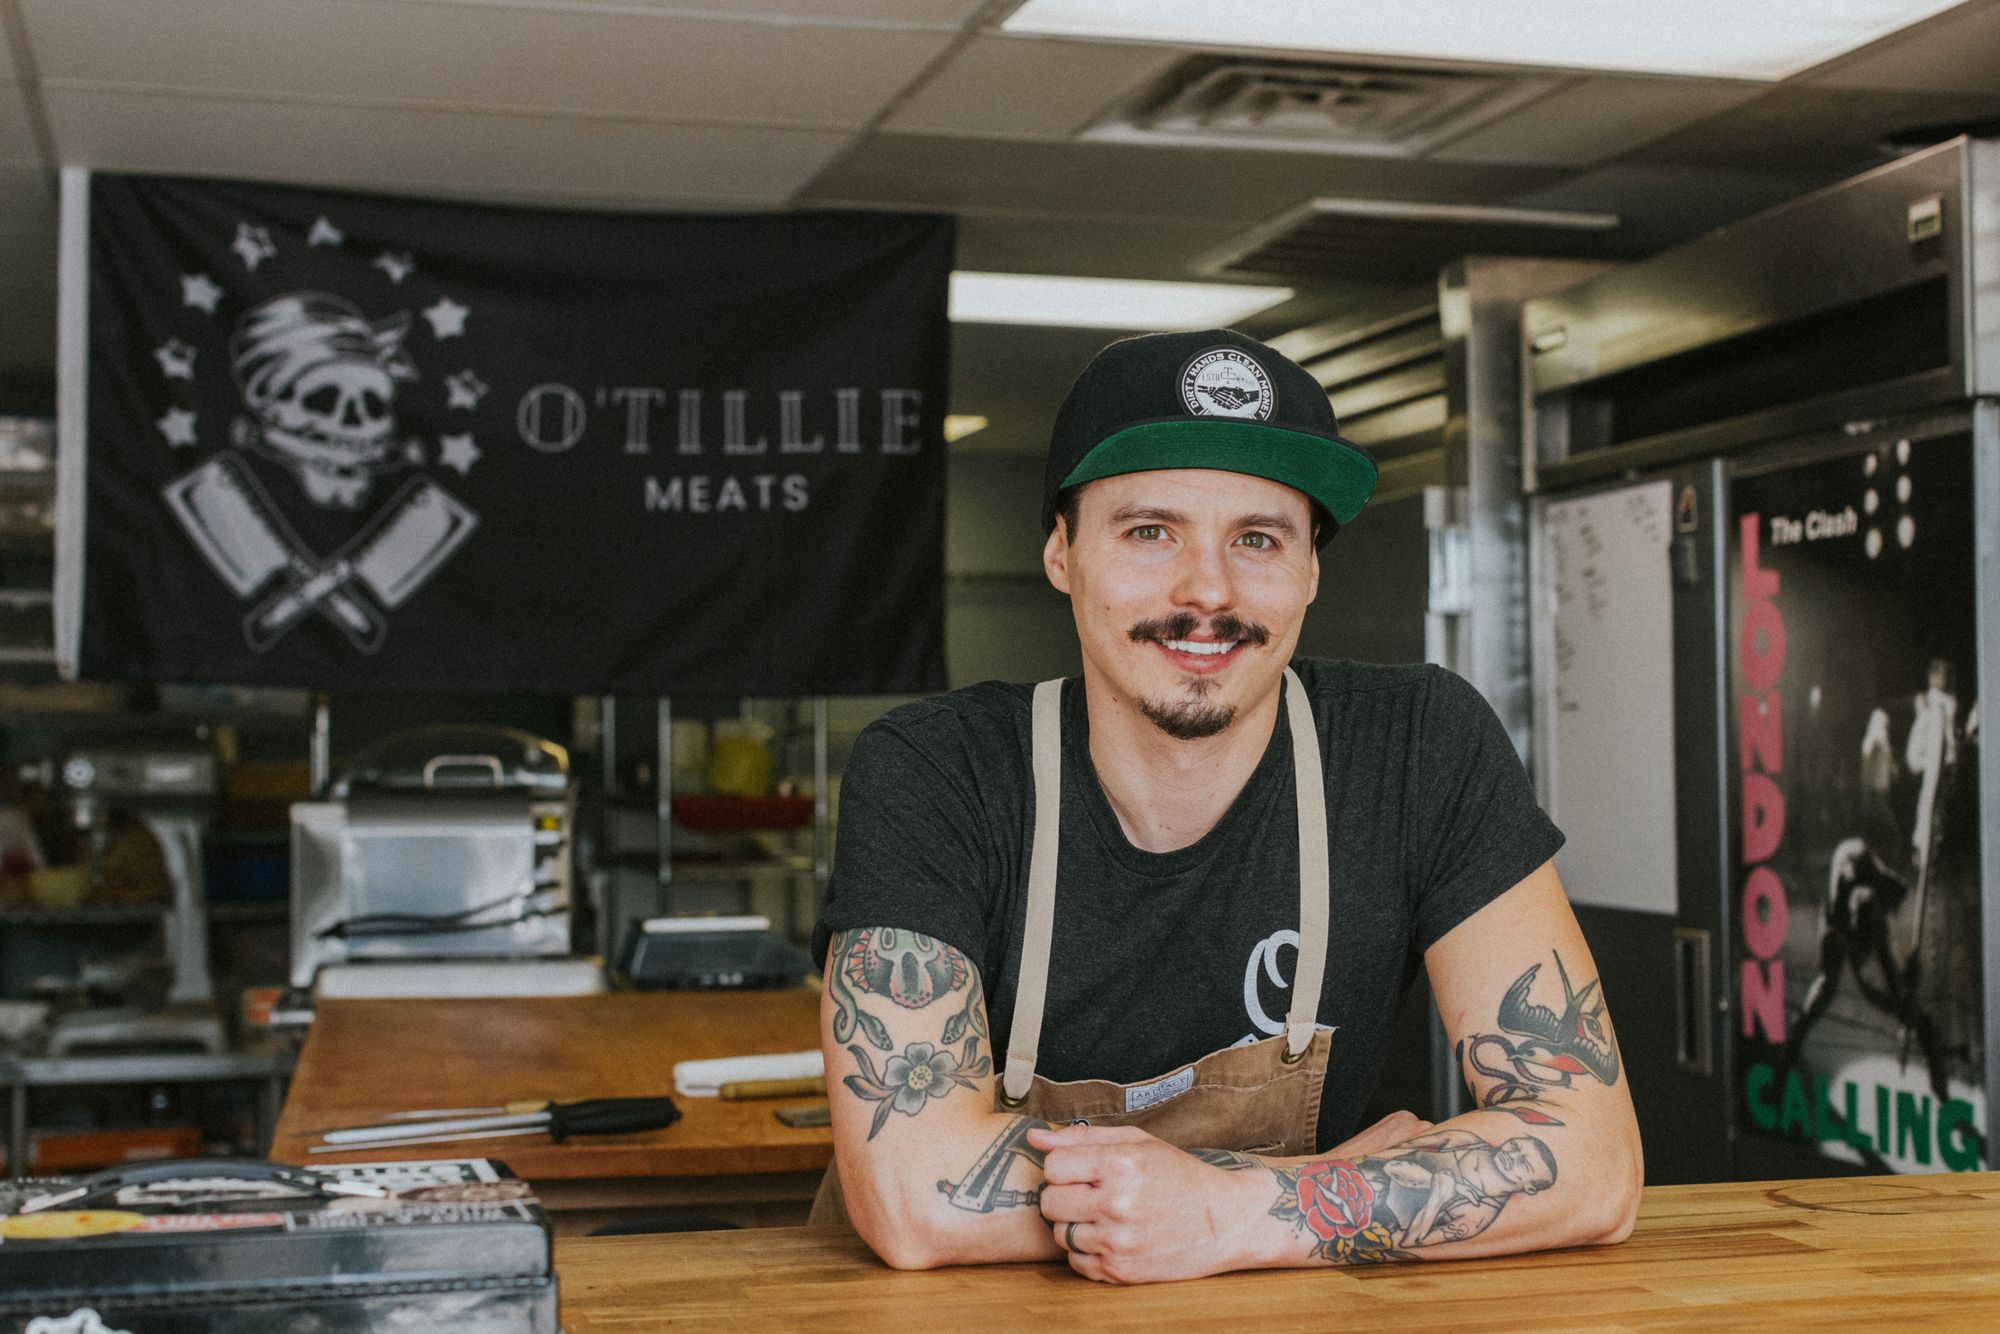 Quality Food Shouldn't Be a Luxury - O’tillie Meats